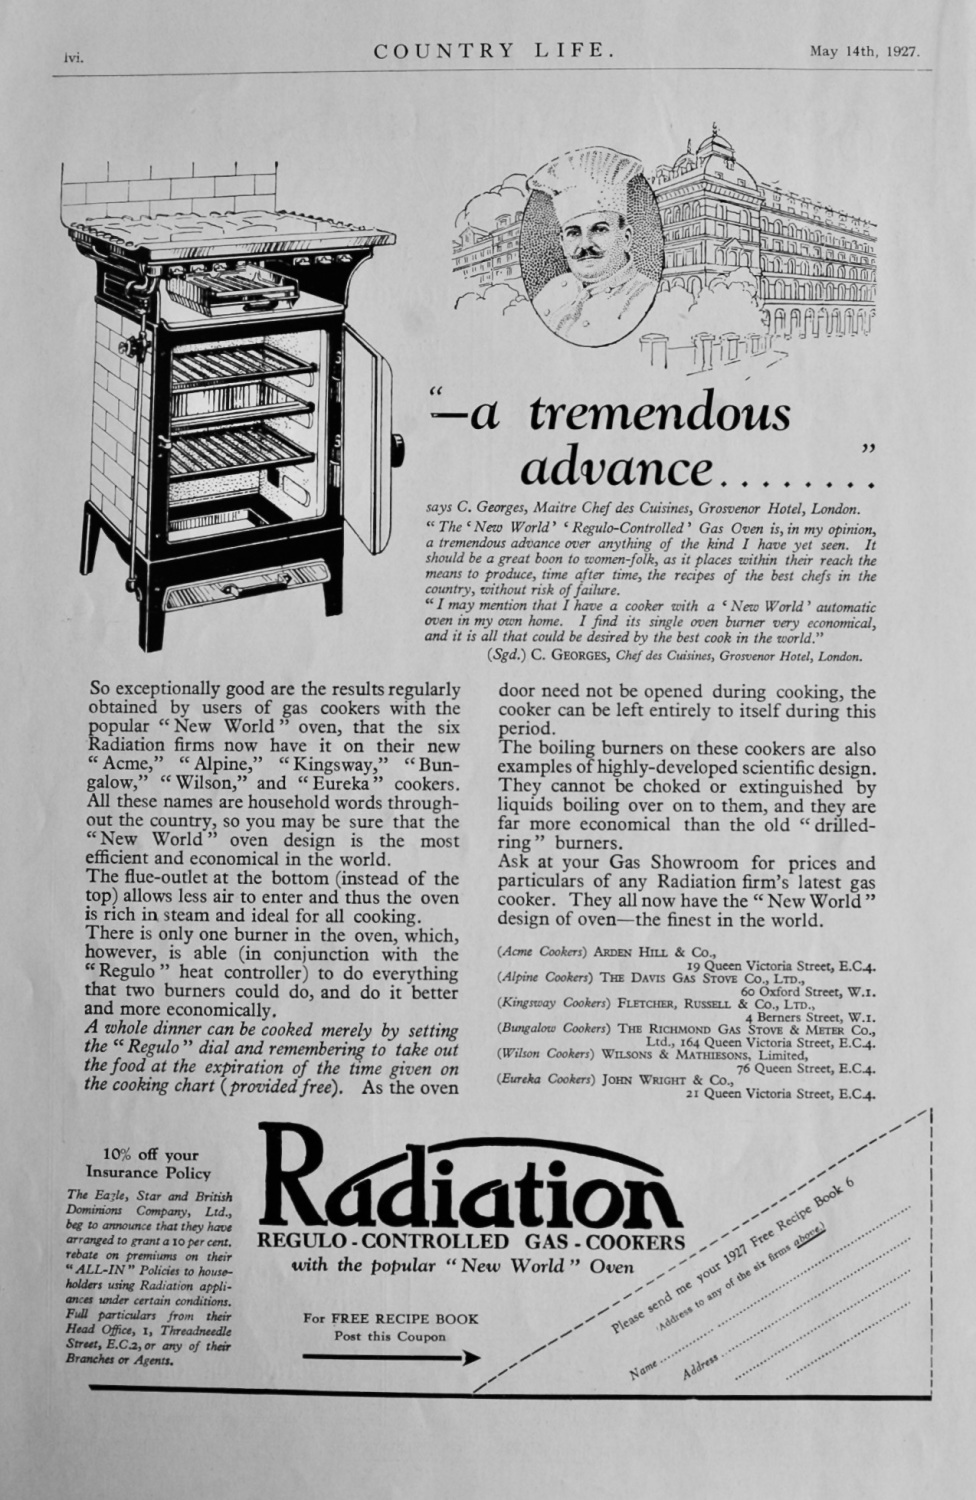 Radiation Regulo-Controlled Gas - Cookers.    (The 